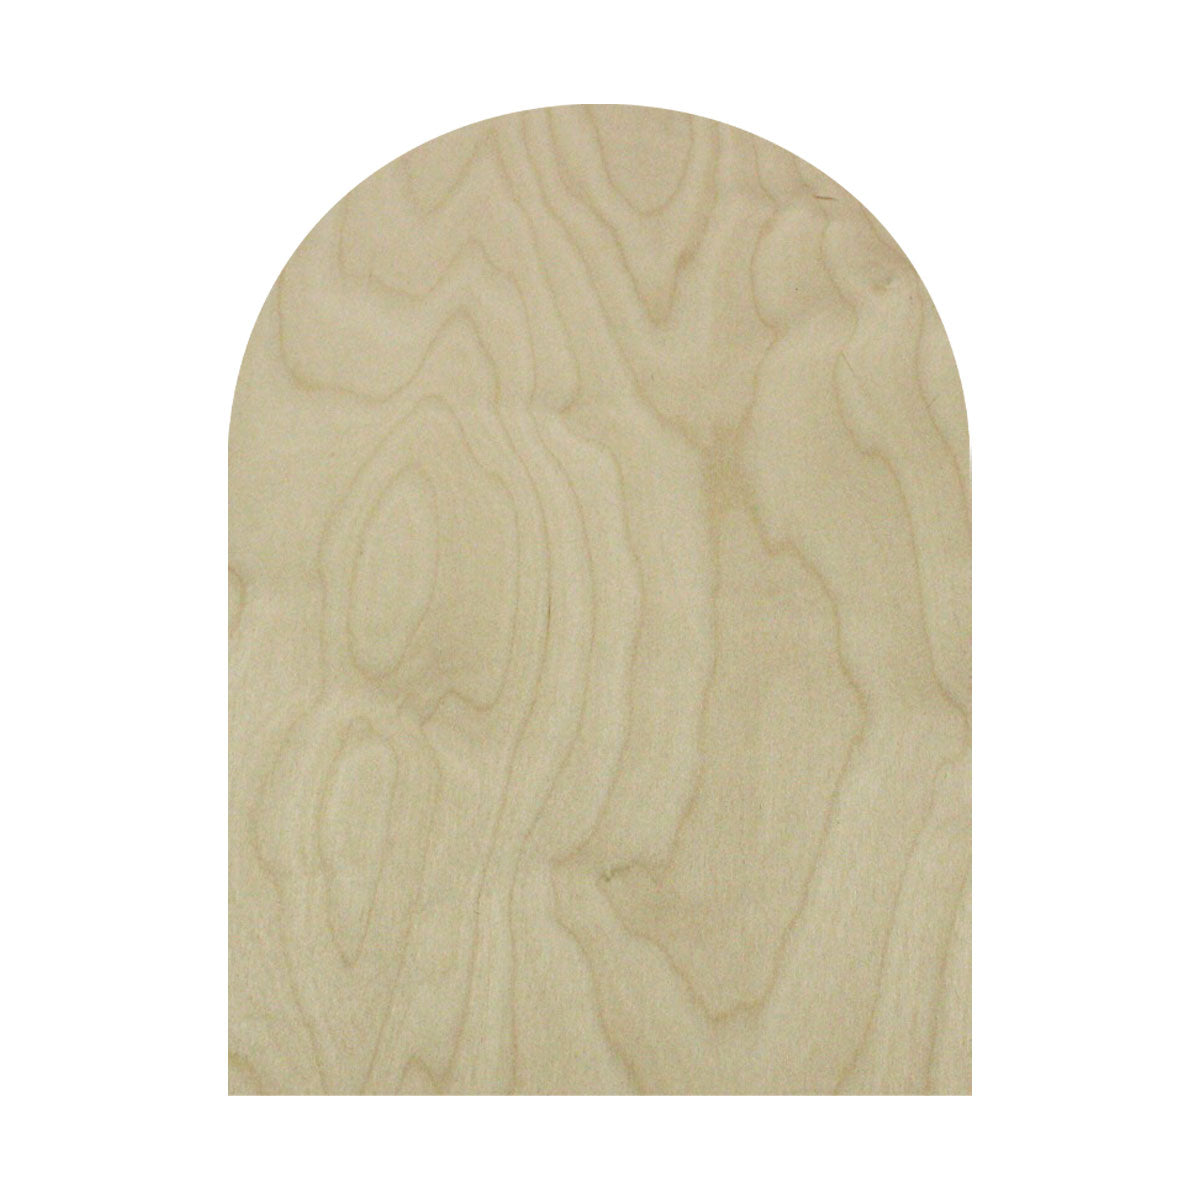 Gothic Rounded Arch Panel